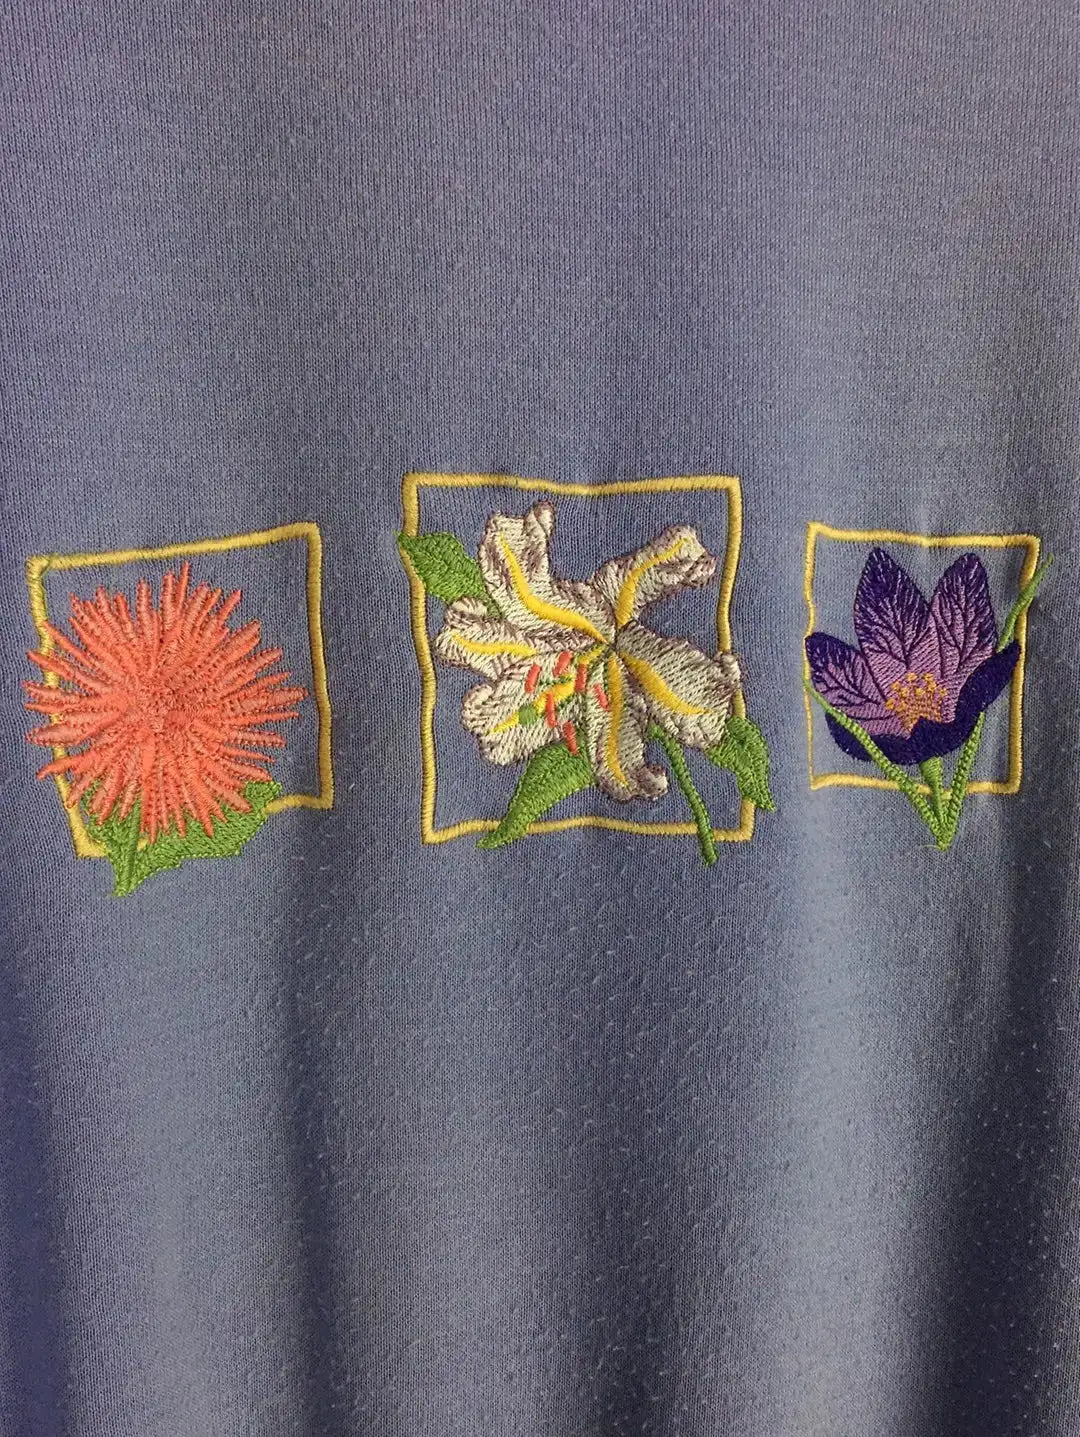 Country Scene Flower Sweater (L)